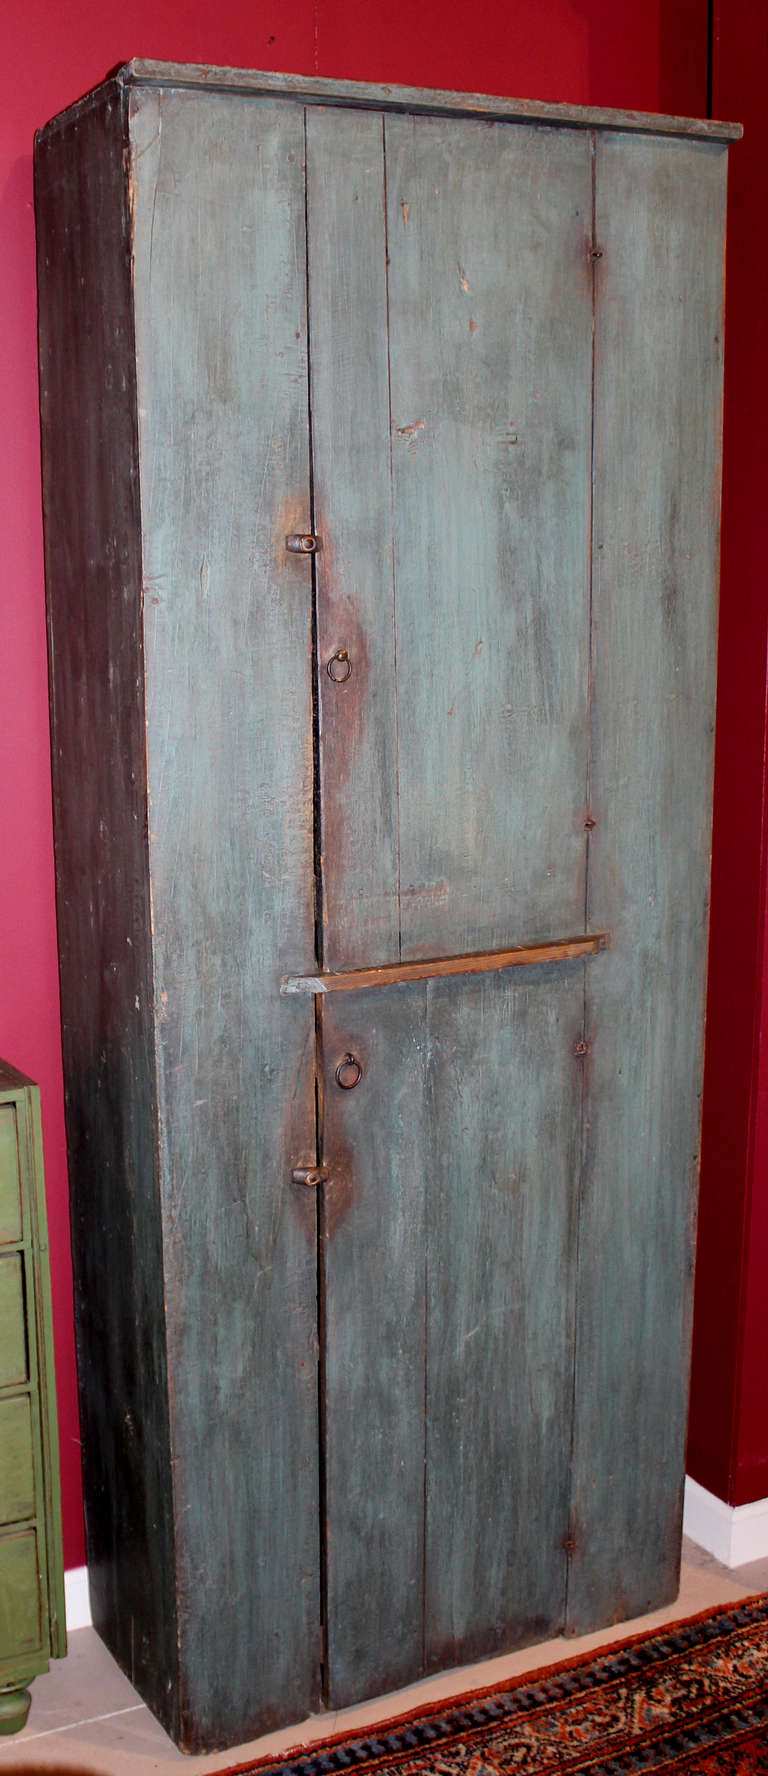 A nice example of an early 19th century two door pine cupboard in blue paint. The top door opens to two interior shelves, with the bottom door opening to one lower shelf. Each door has brass and iron ring handles.